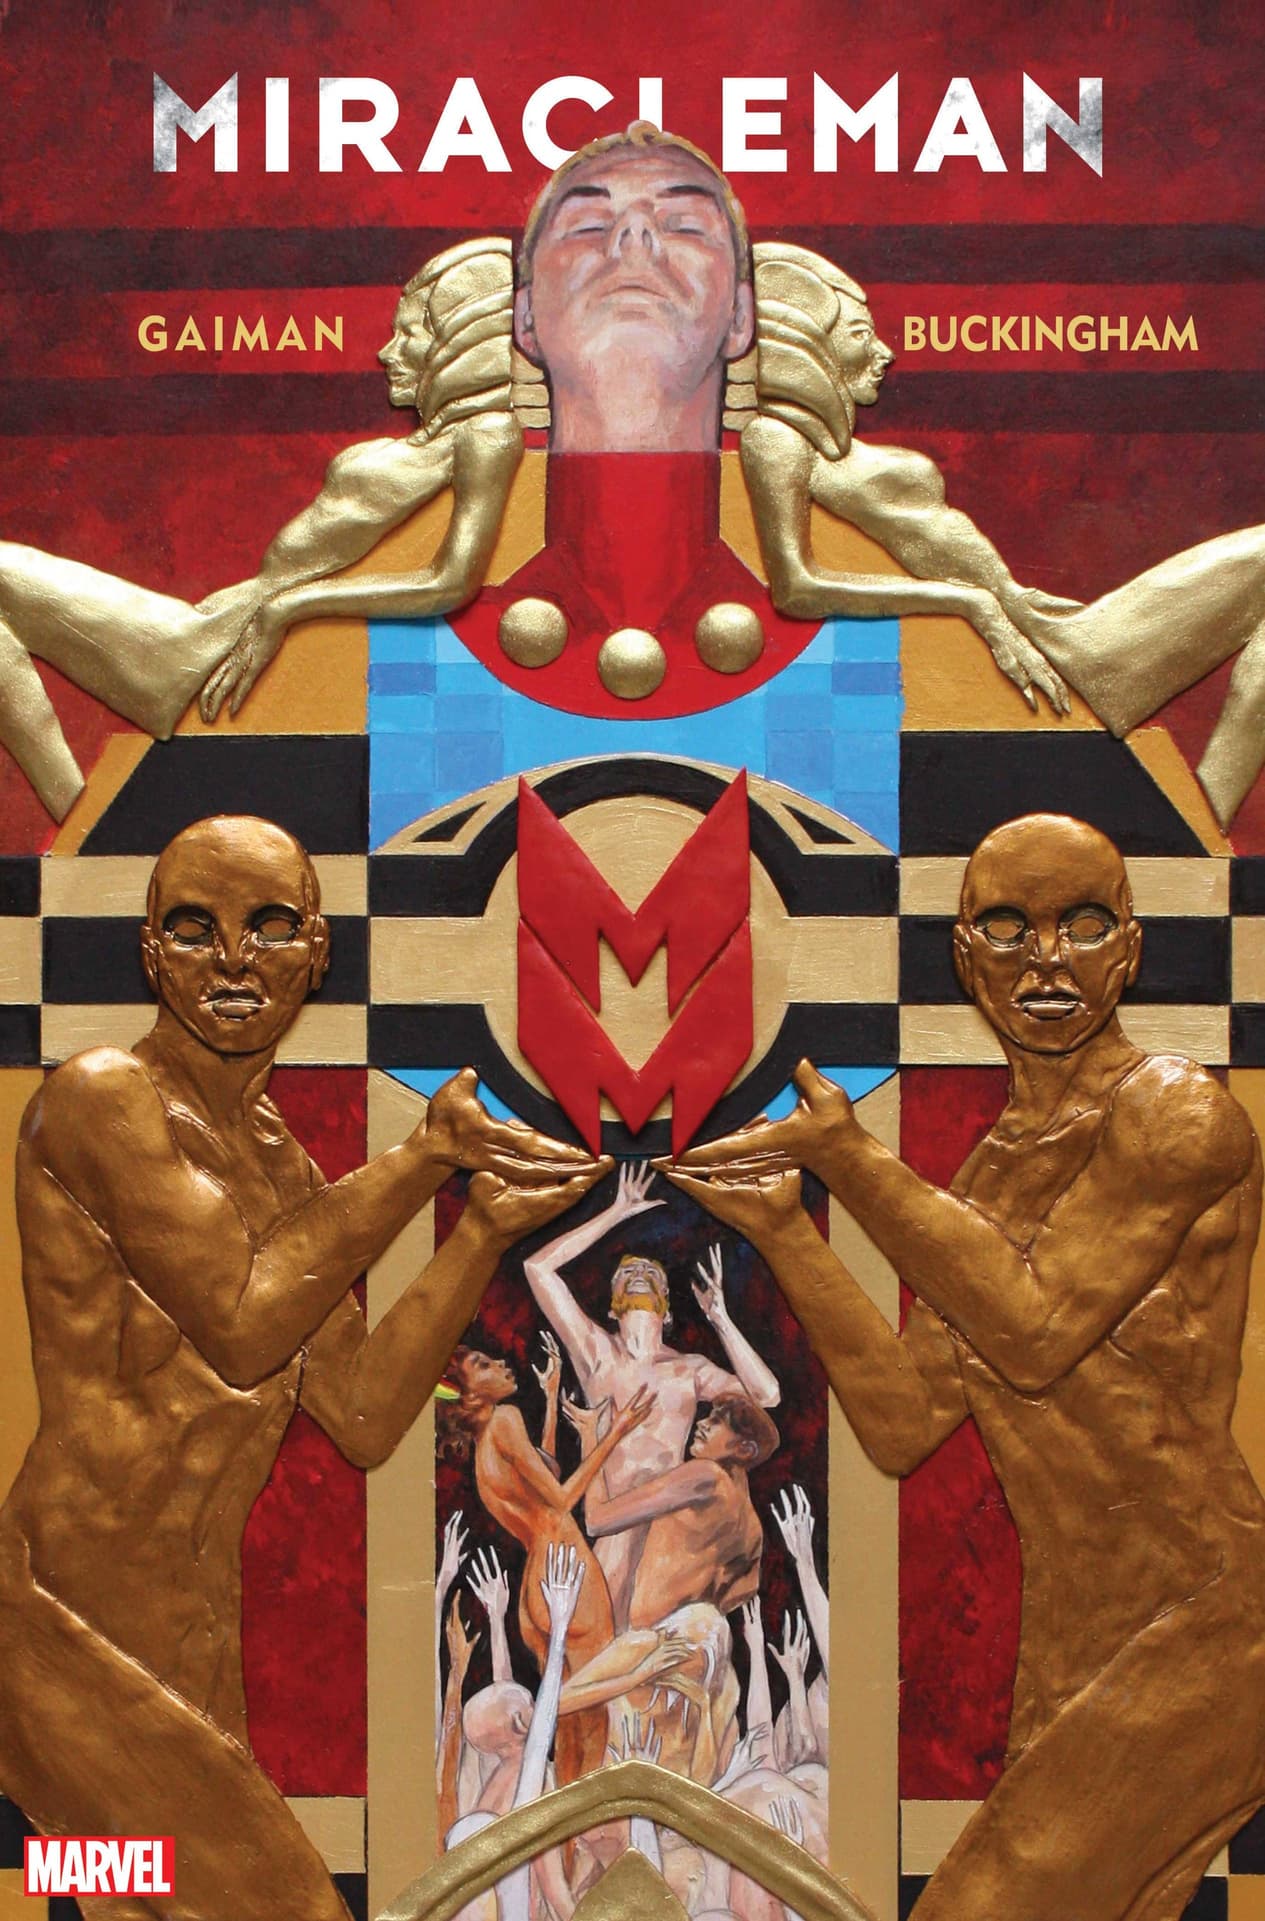 Miracleman by Gaiman & Buckingham Book 1: The Golden Age cover by Mark Buckingham